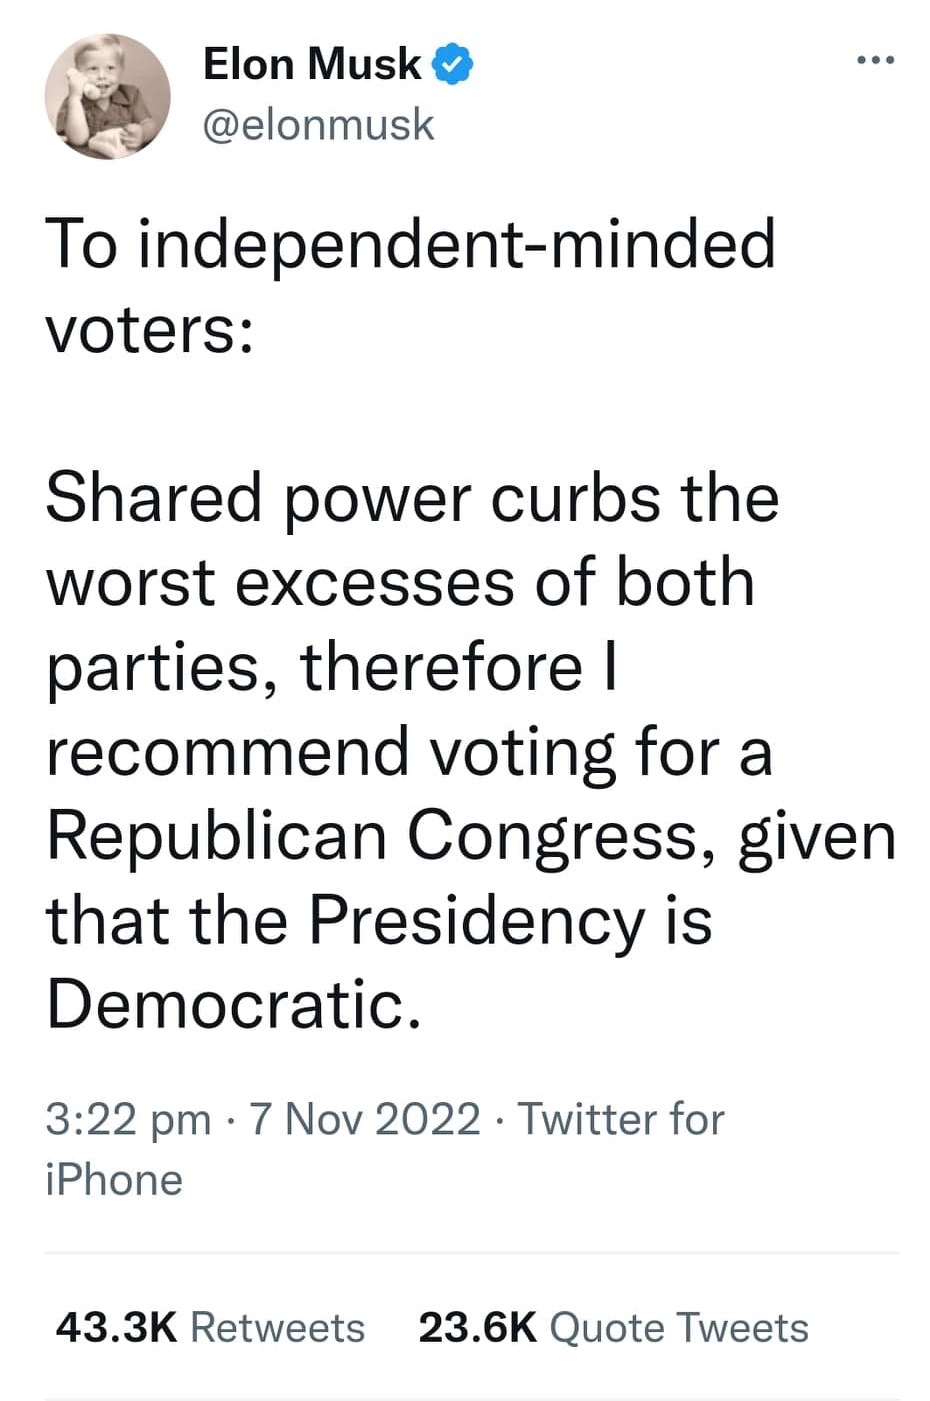 To independent-minded voters:  Shared power curbs the worst excesses of both parties, therefore I recommend voting for a Republican Congress, given that the Presidency is Democratic.